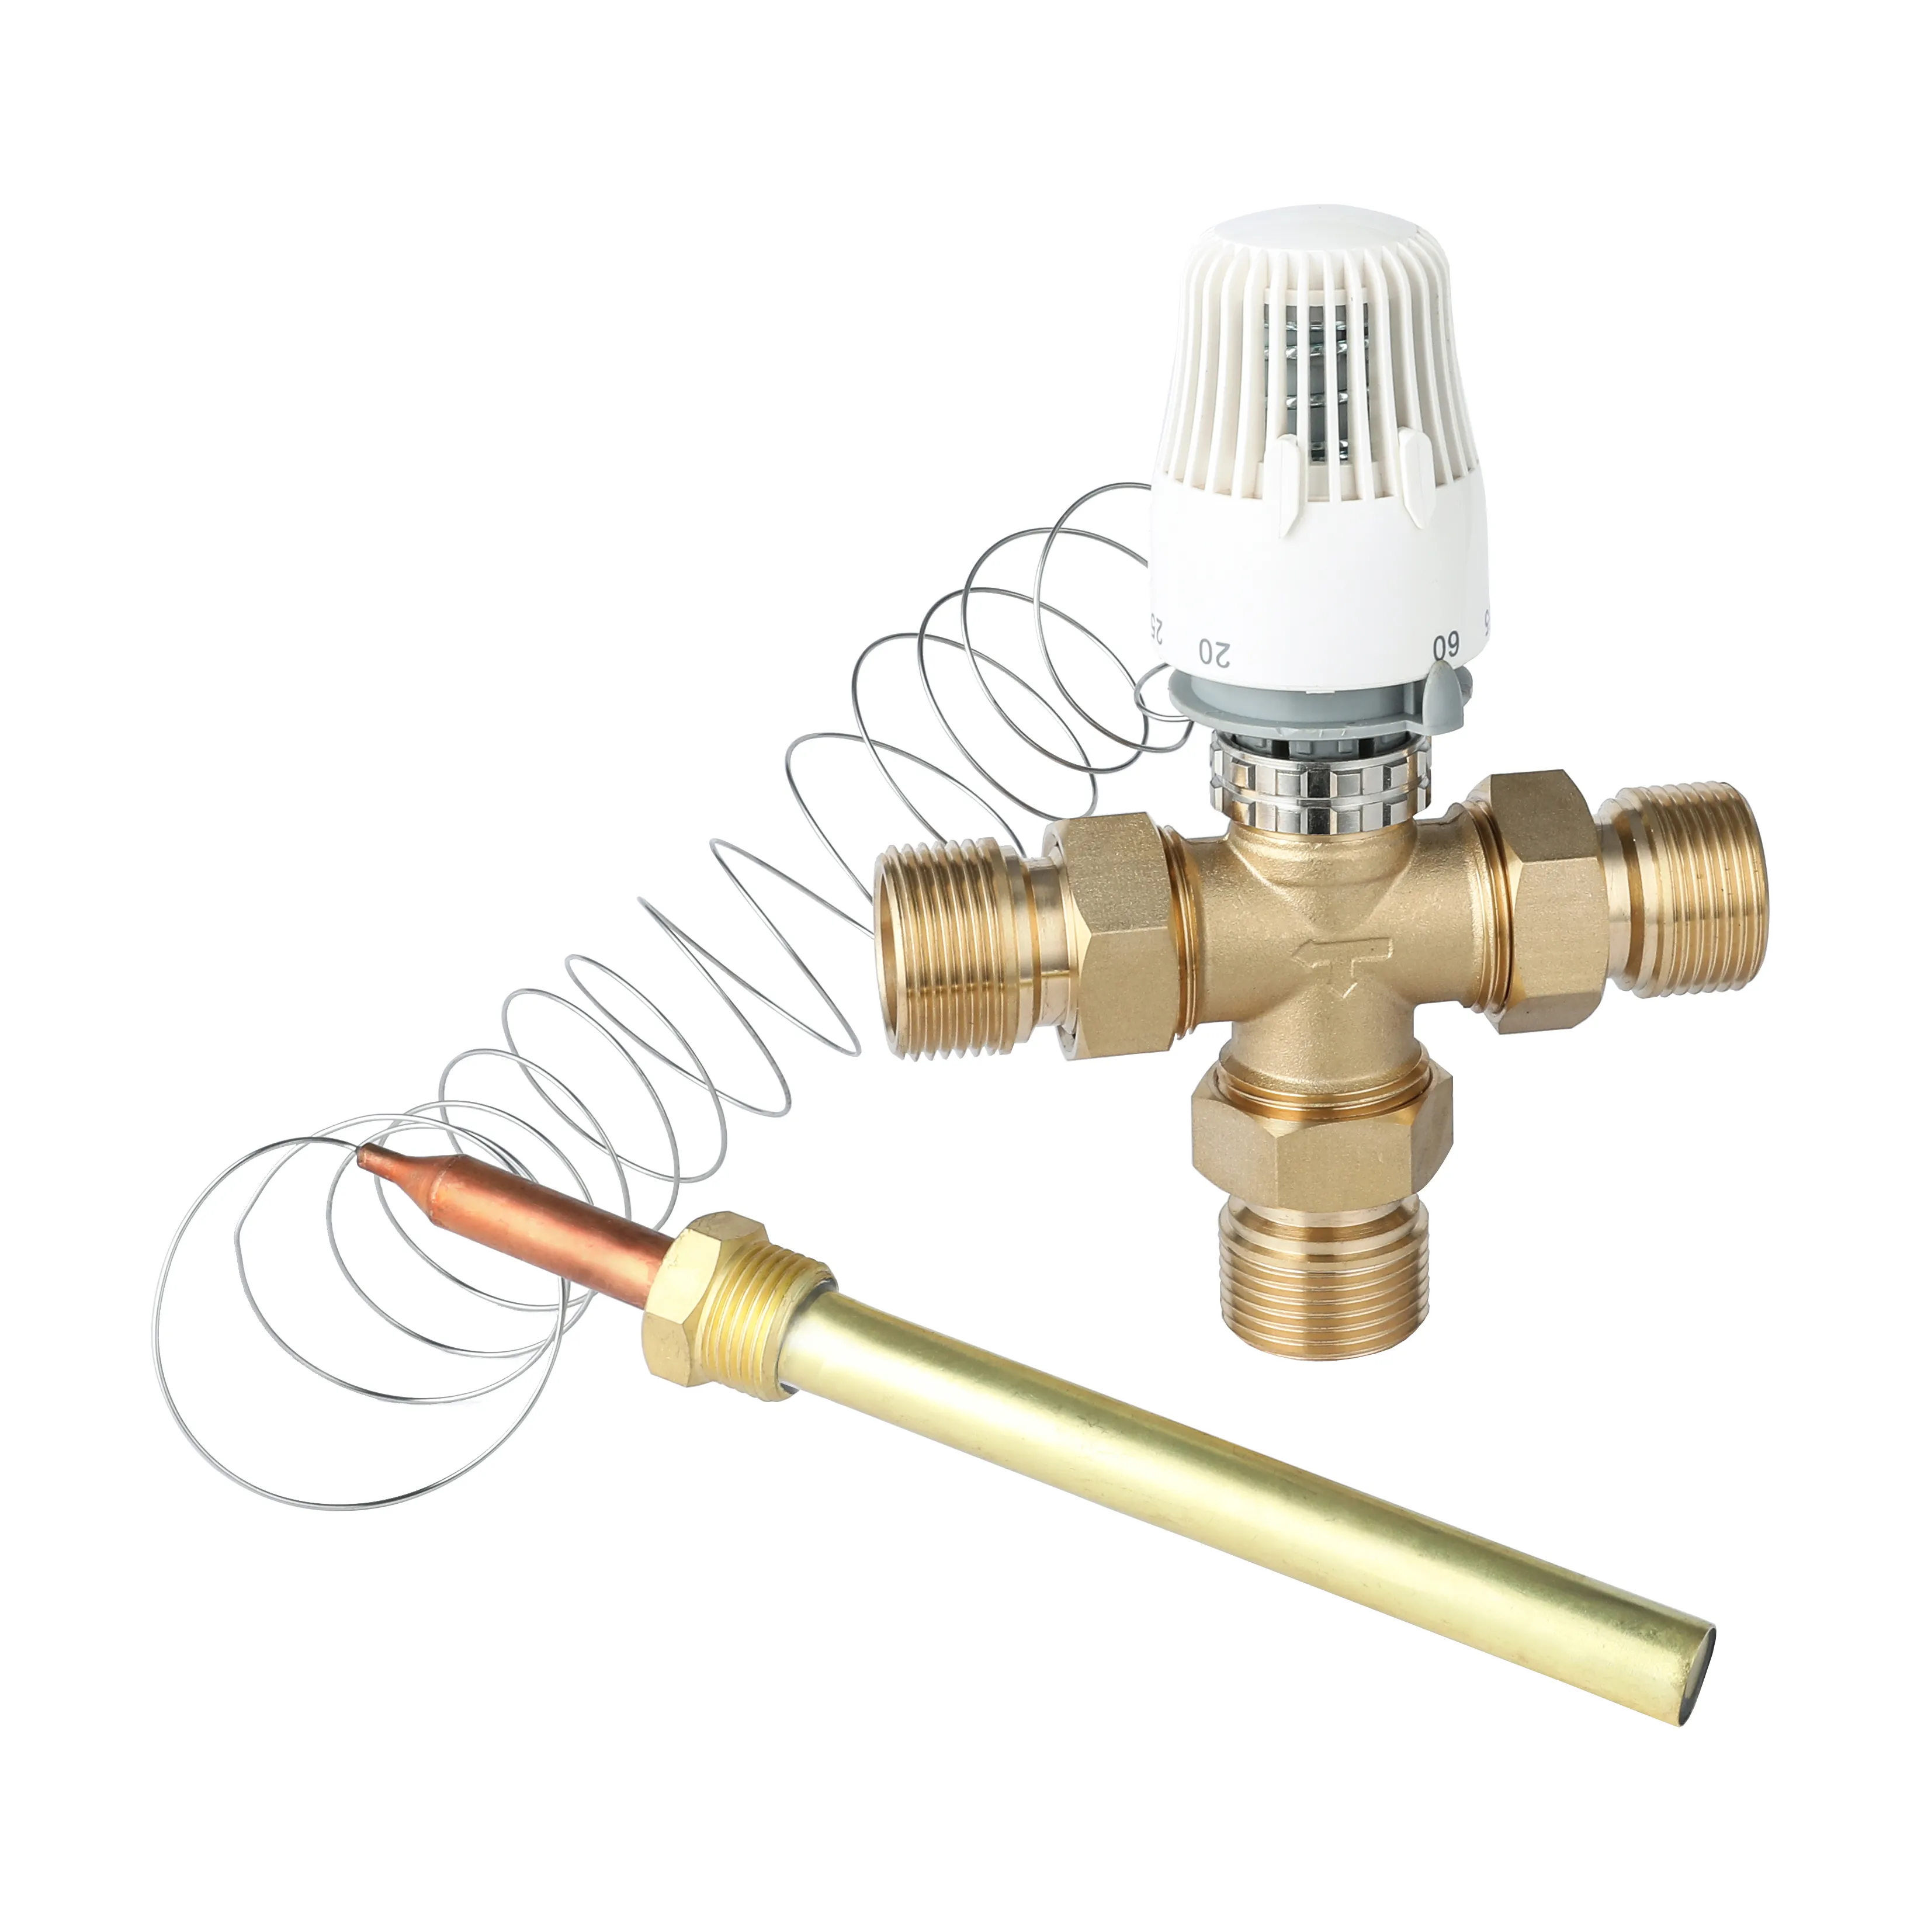 1" Brass Water Thermostatic Mixing Valve with Thermostatic Head Remote Sensorl